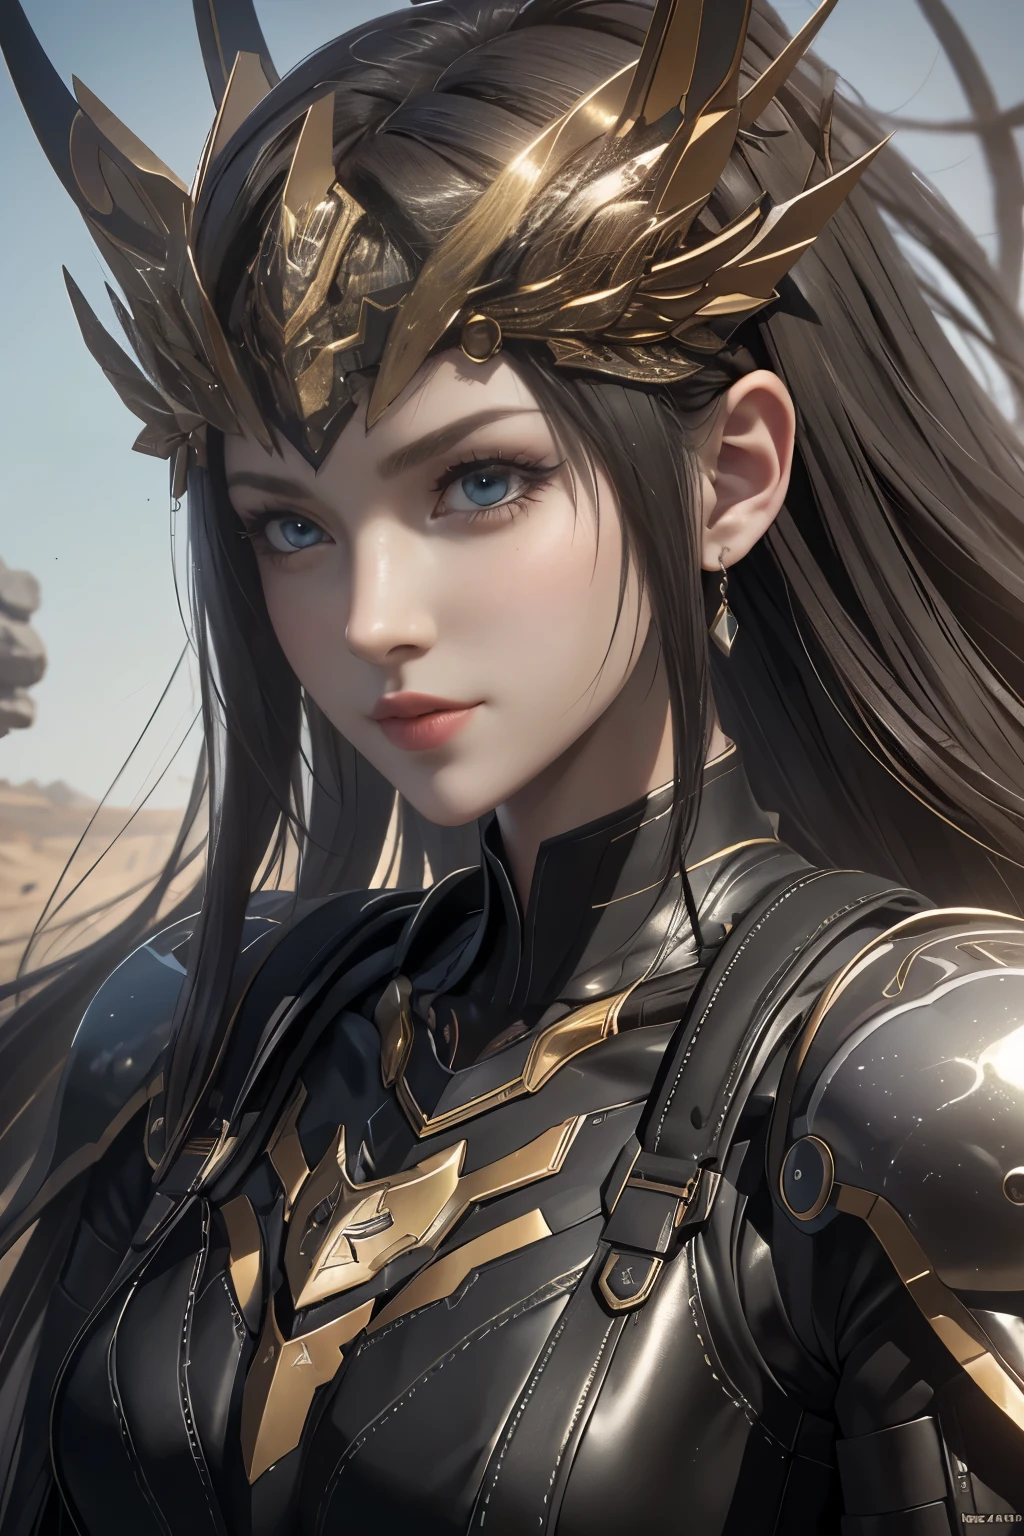 Game art，The best picture quality，Highest resolution，8k，(A bust photograph)，(Portrait)，(Head close-up:1.5)，(Rule of thirds)，Unreal Engine 5 rendering works， (The Girl of the Future)，(Female Warrior)， 
20-year-old girl，((Hunter))，An eye rich in detail，(Big breasts)，Elegant and noble，indifferent，brave，
（Medieval-style fur combat clothing，Glowing magic lines，Animal skin clothing with rich detailedieval Lady Knight，Medieval ranger，
Photo poses，Simple background，Movie lights，Ray tracing，Game CG，((3D Unreal Engine))，oc rendering reflection pattern